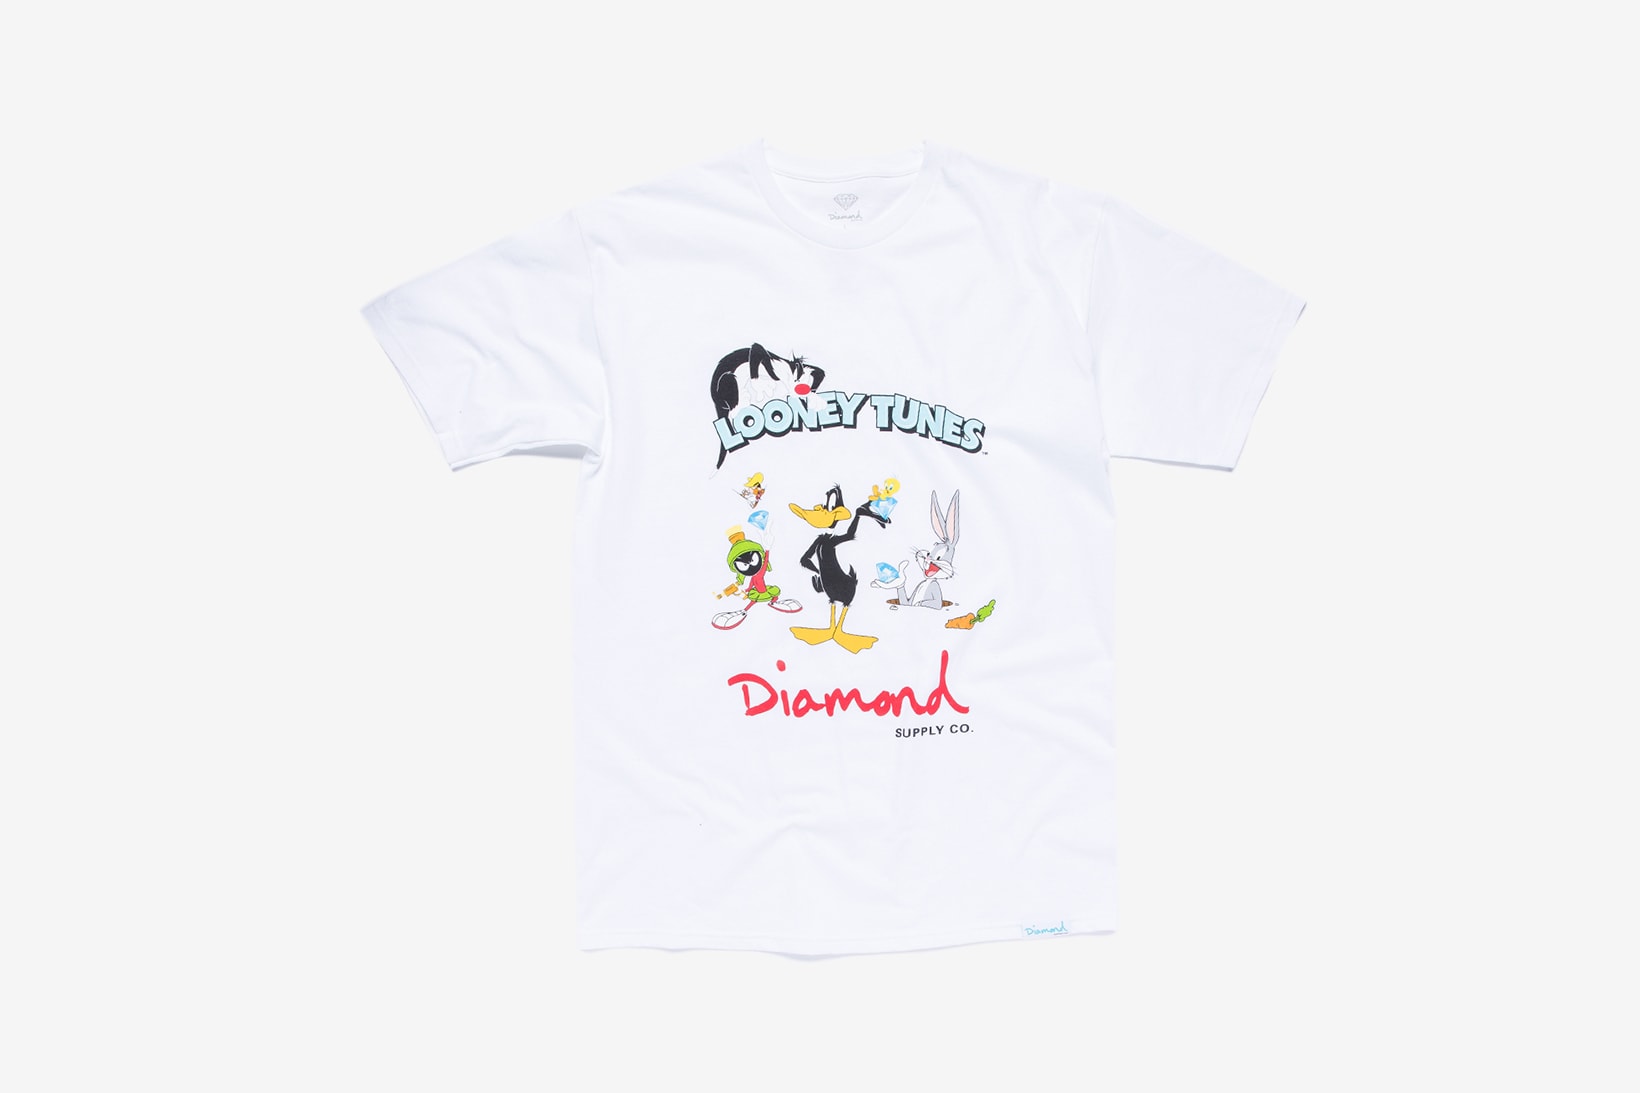 Looney Tunes x Diamond Supply Co. Collection Sylvester Bugs Bunny Daffy Duck Marvin the Martian T-Shirt White